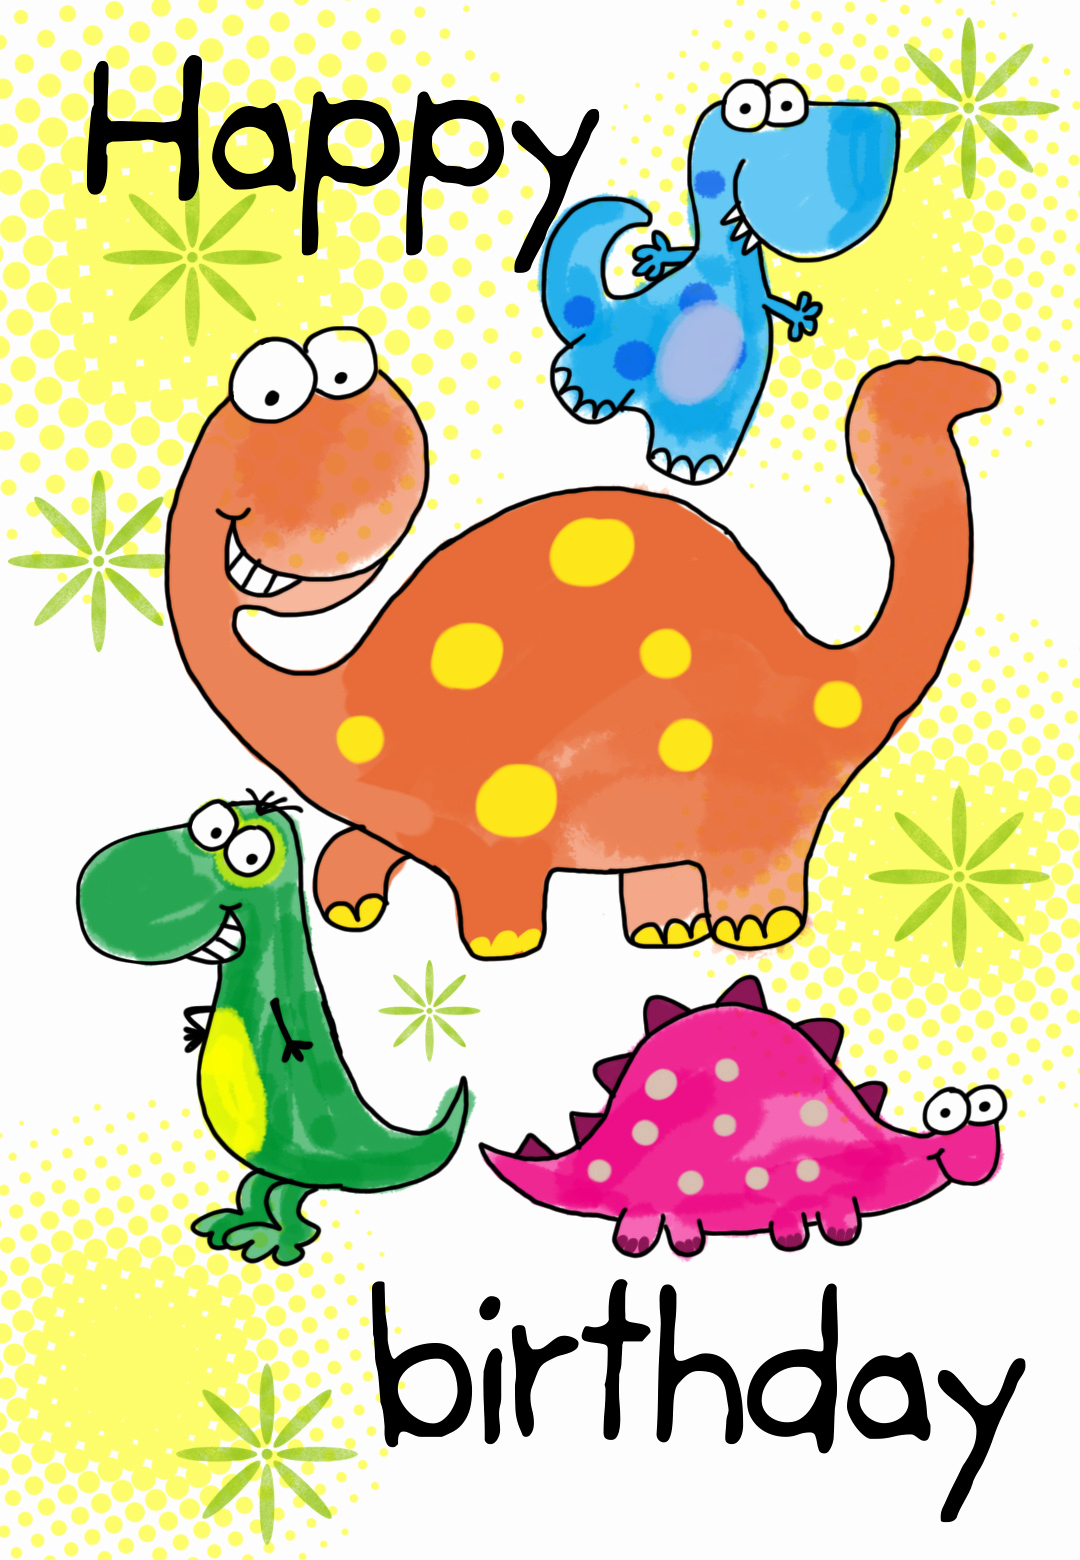 Happy Birthday Pictures Free Luxury Four Cute Dinosaurs Birthday Card